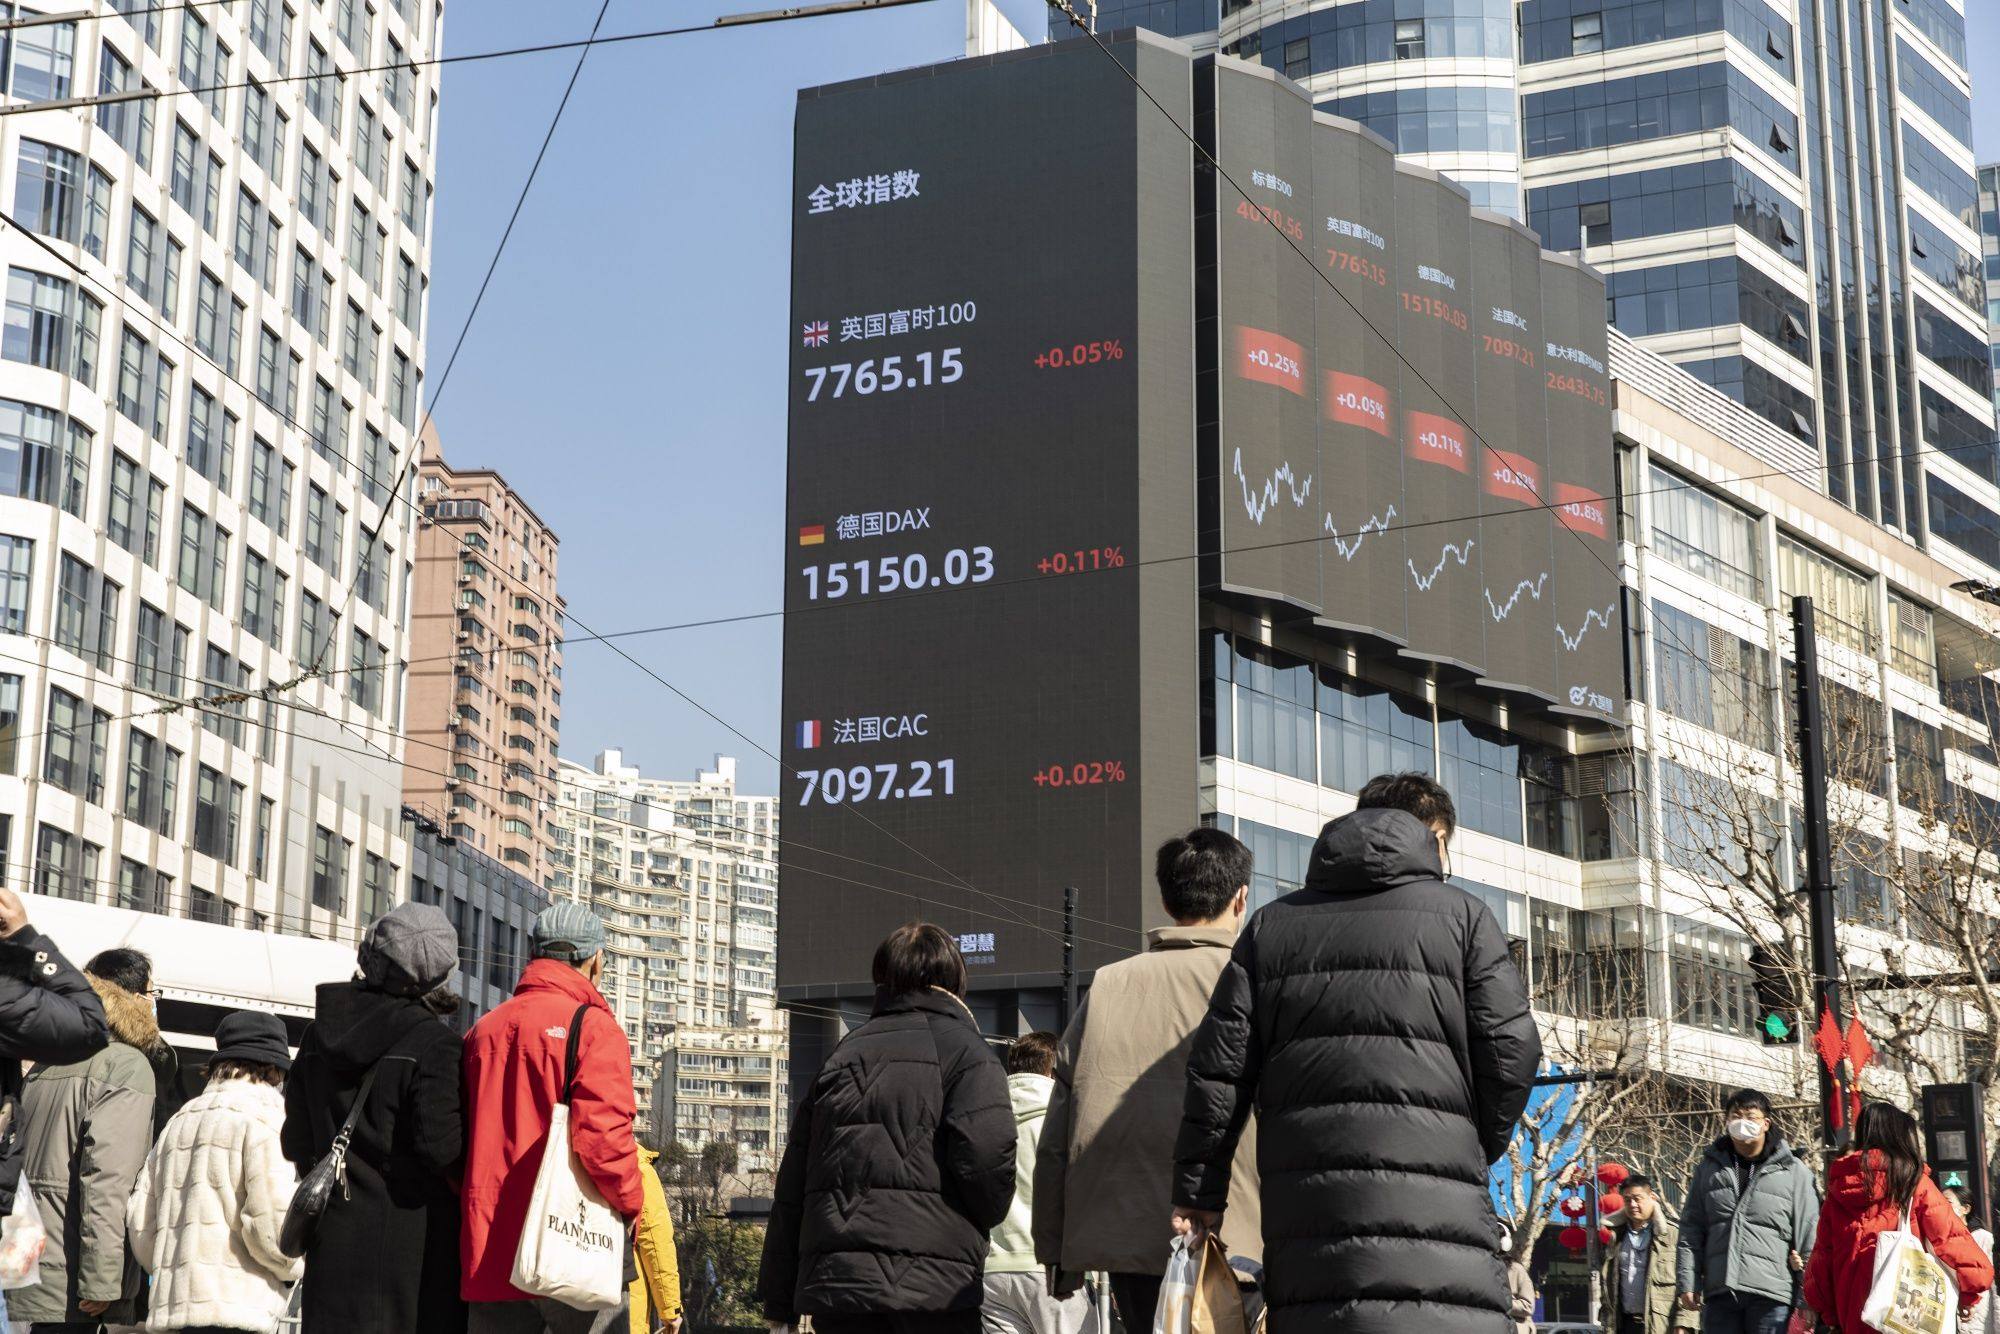 Global market indices are displayed on a screen in Shanghai. Photo: Bloomberg